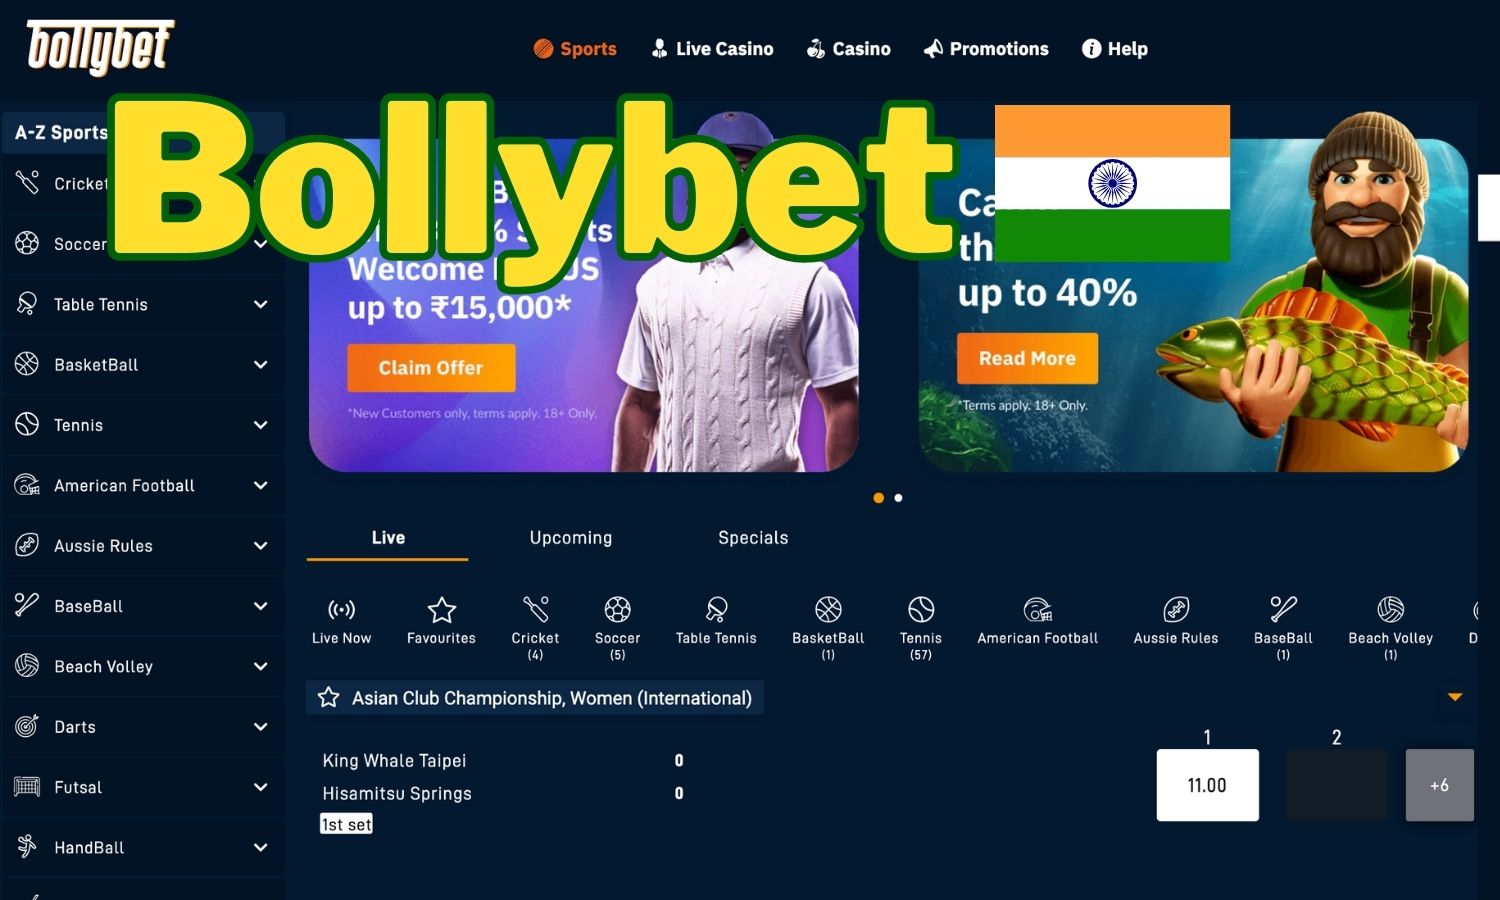 Bollybet In India Review: Features of Bollybet